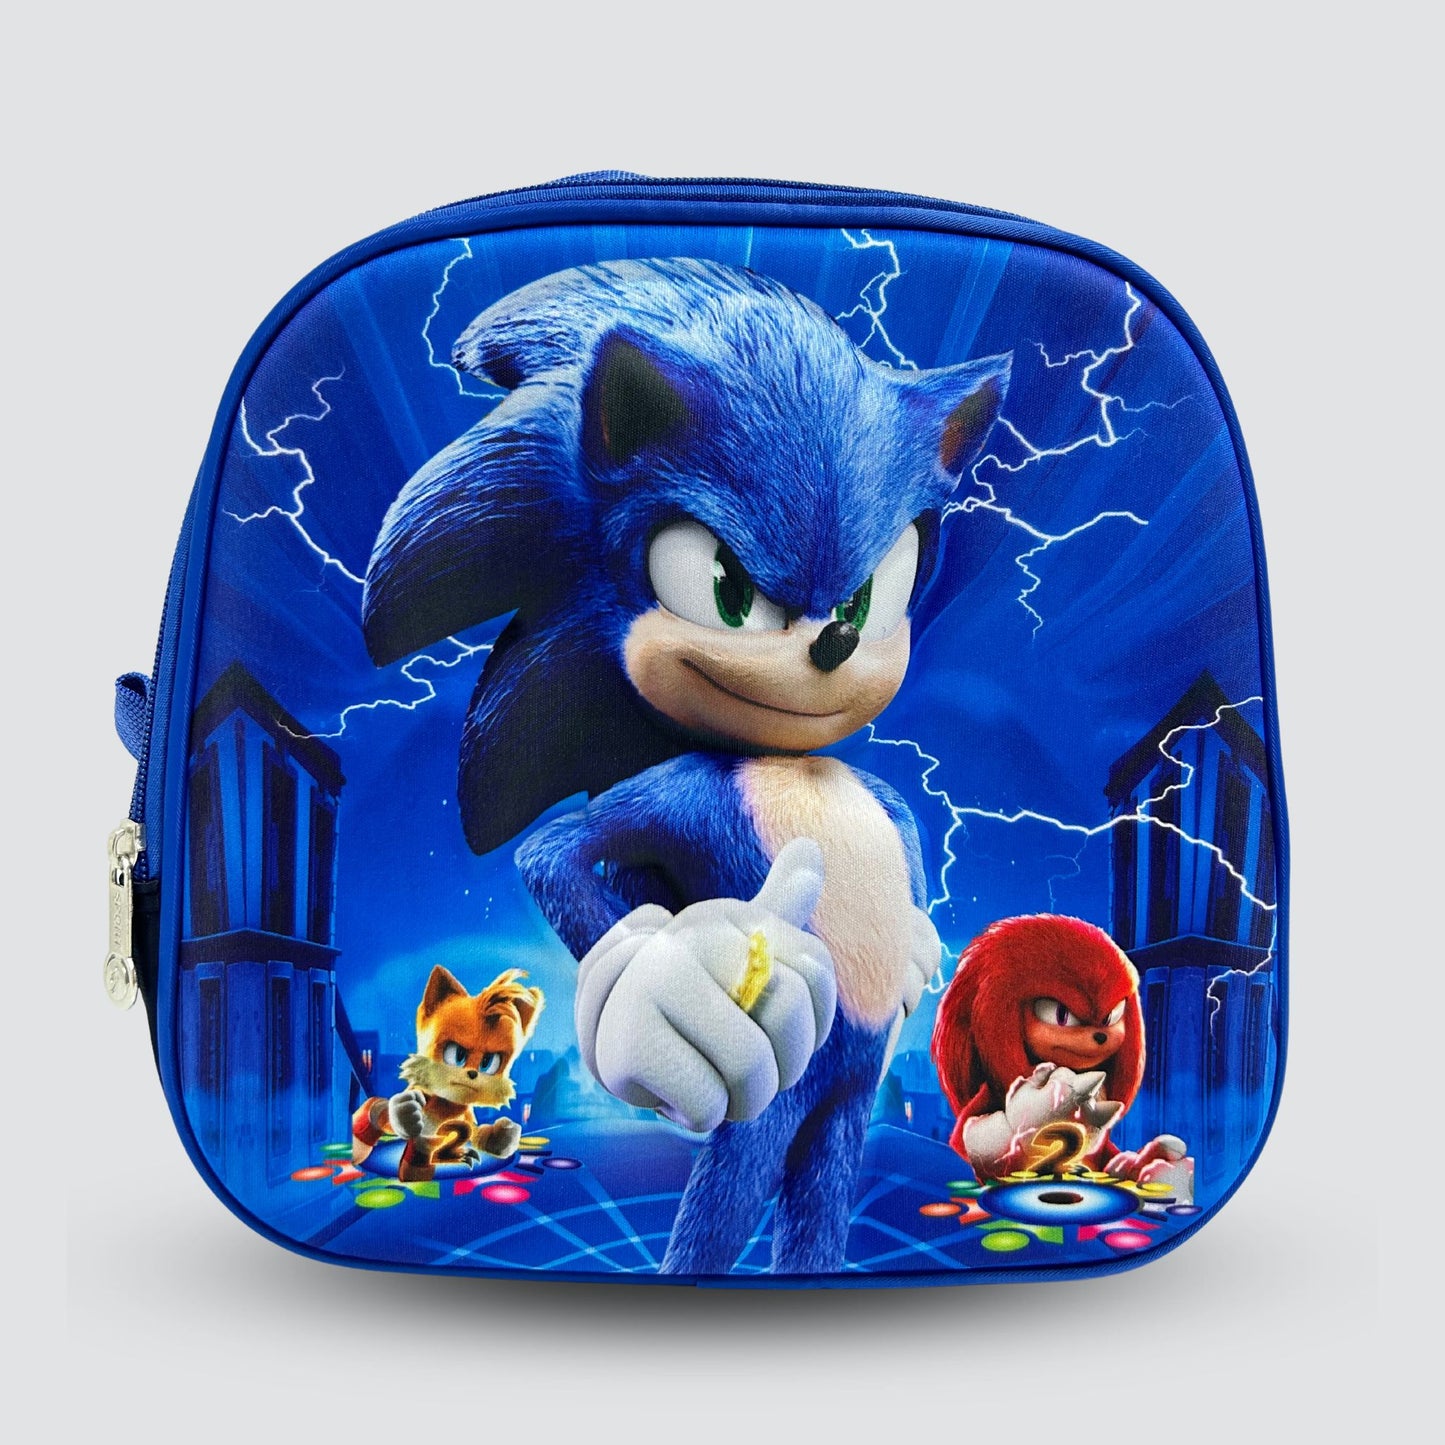 Blue sonic hedge hog character insulated lunch bag